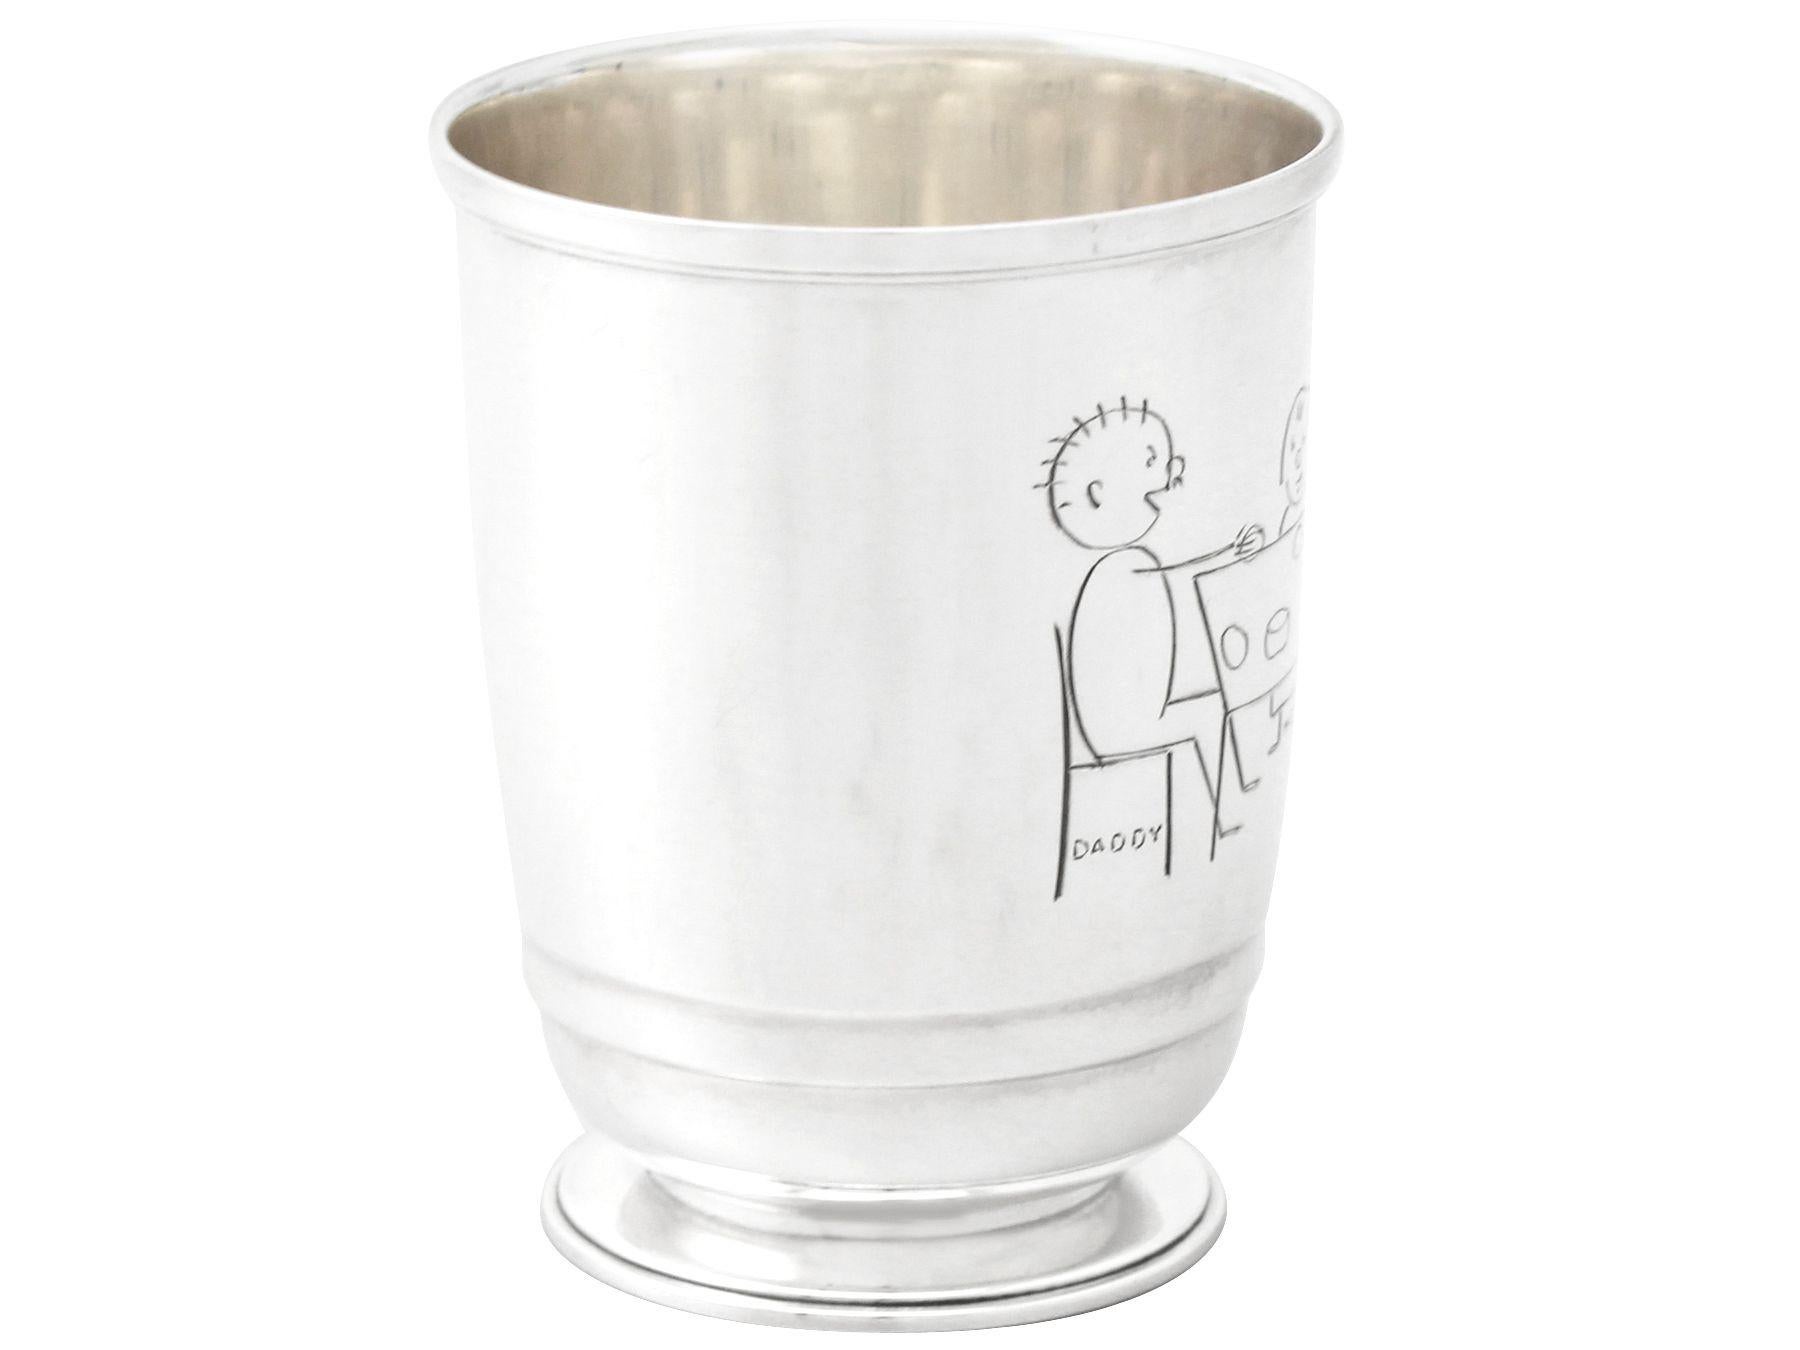 A fine and impressive, unusual antique George VI English sterling silver character christening mug in the Art Deco style.

This fine antique George VI sterling silver christening mug has a plain bell shaped form onto a circular spreading foot.

One